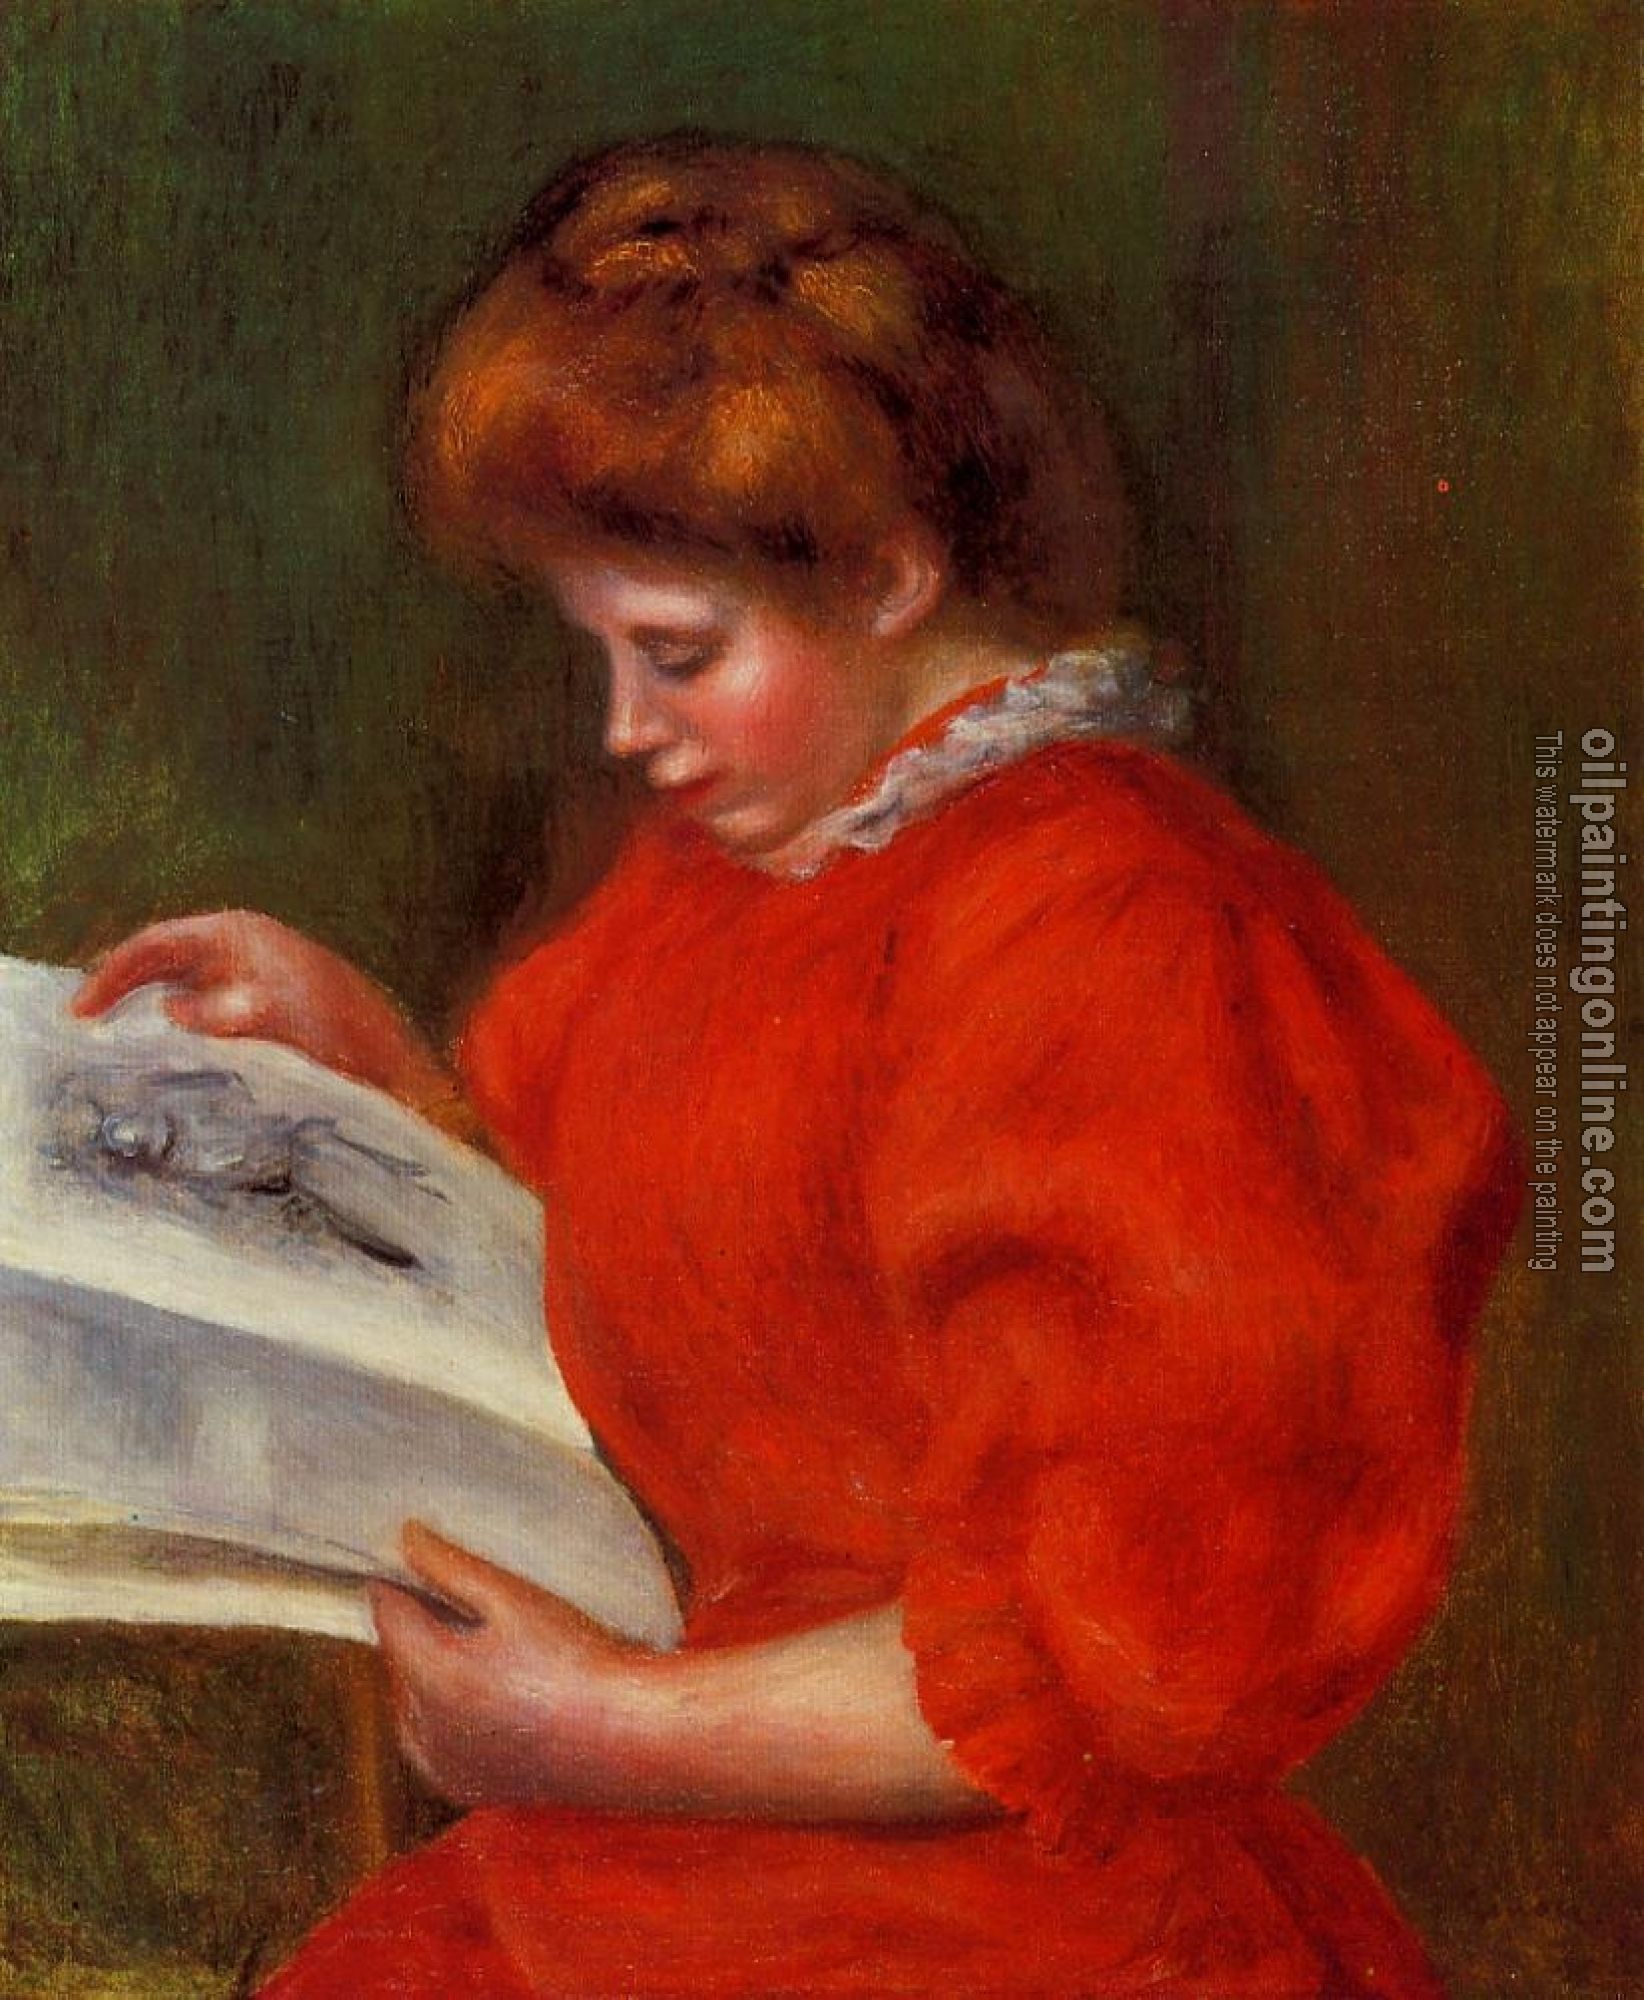 Renoir, Pierre Auguste - Young Woman Looking at a Print